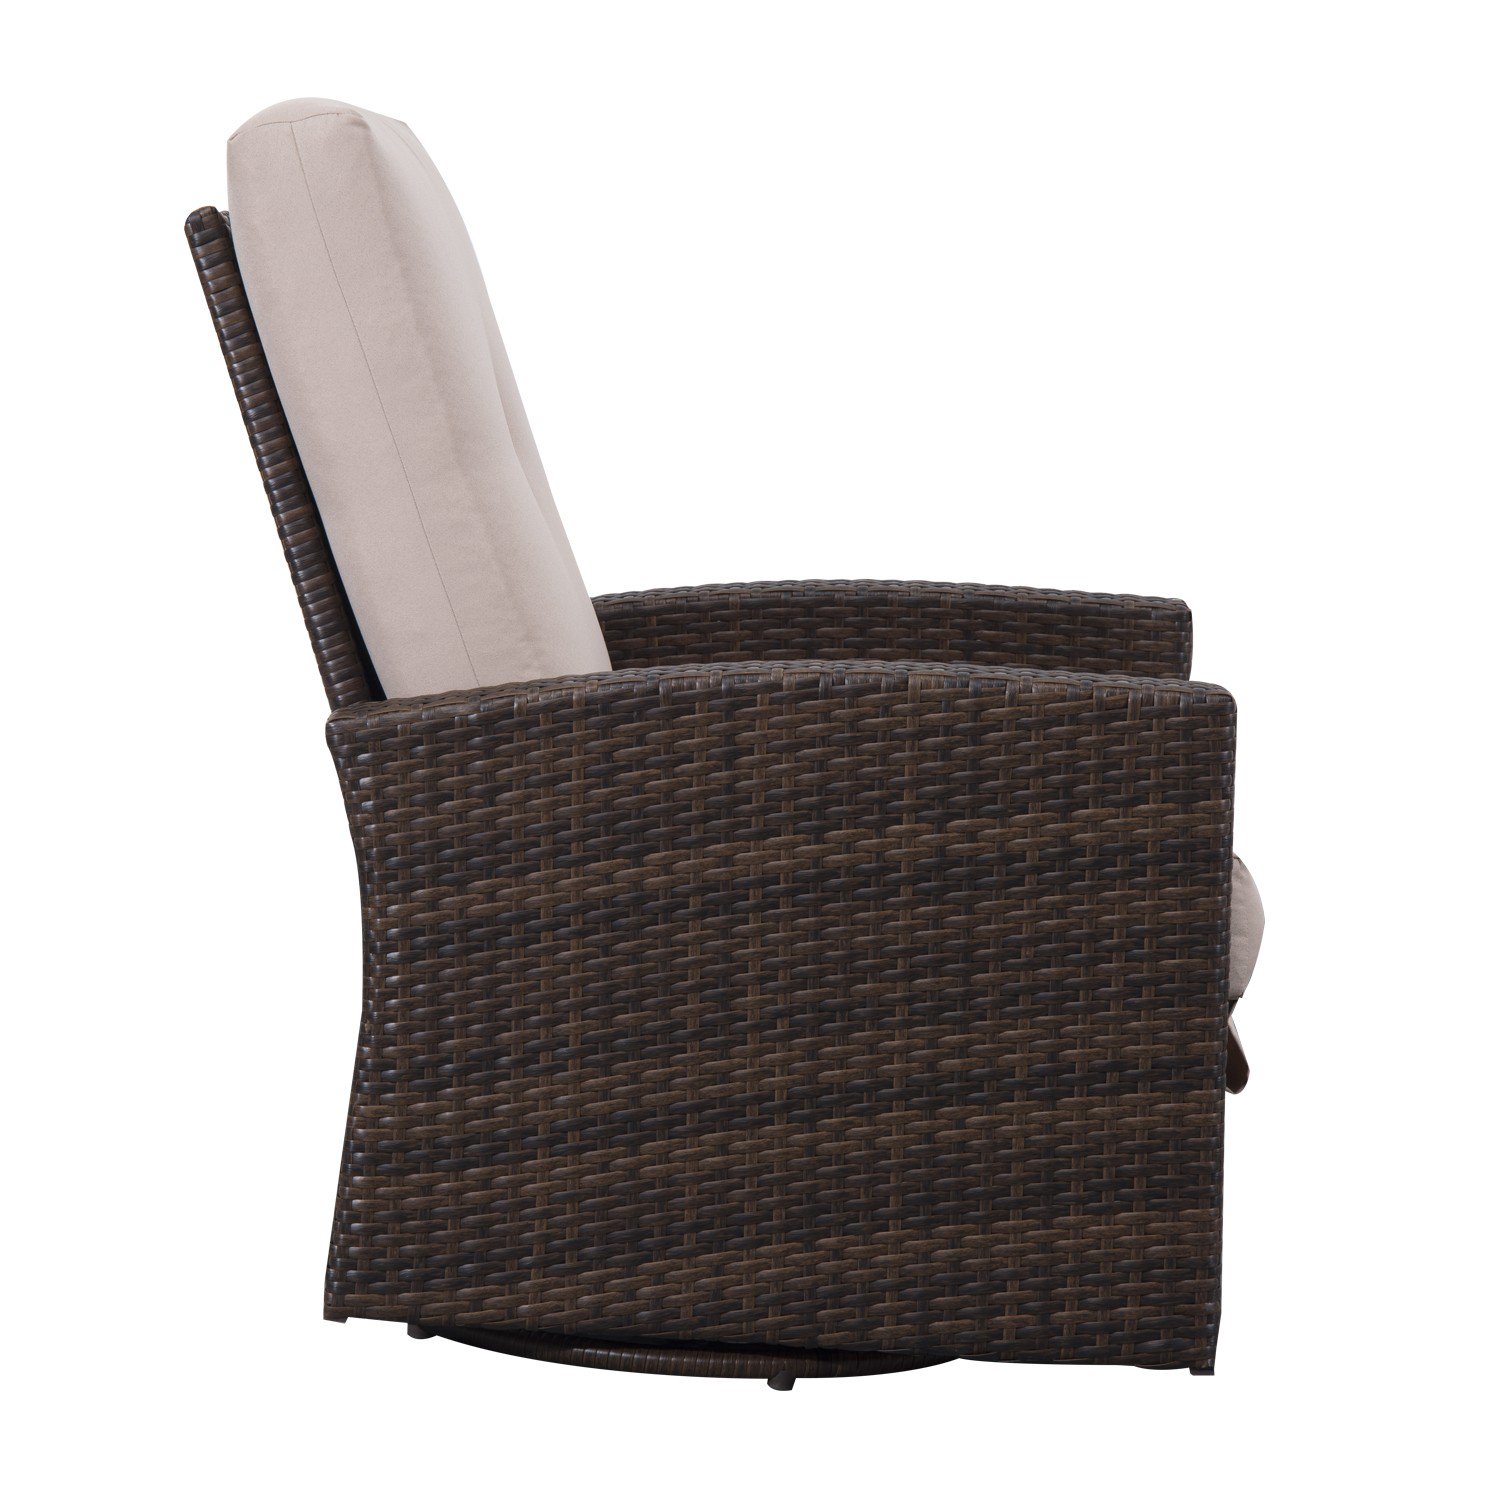 Rattan Outdoor Lounge Chair photo - 9